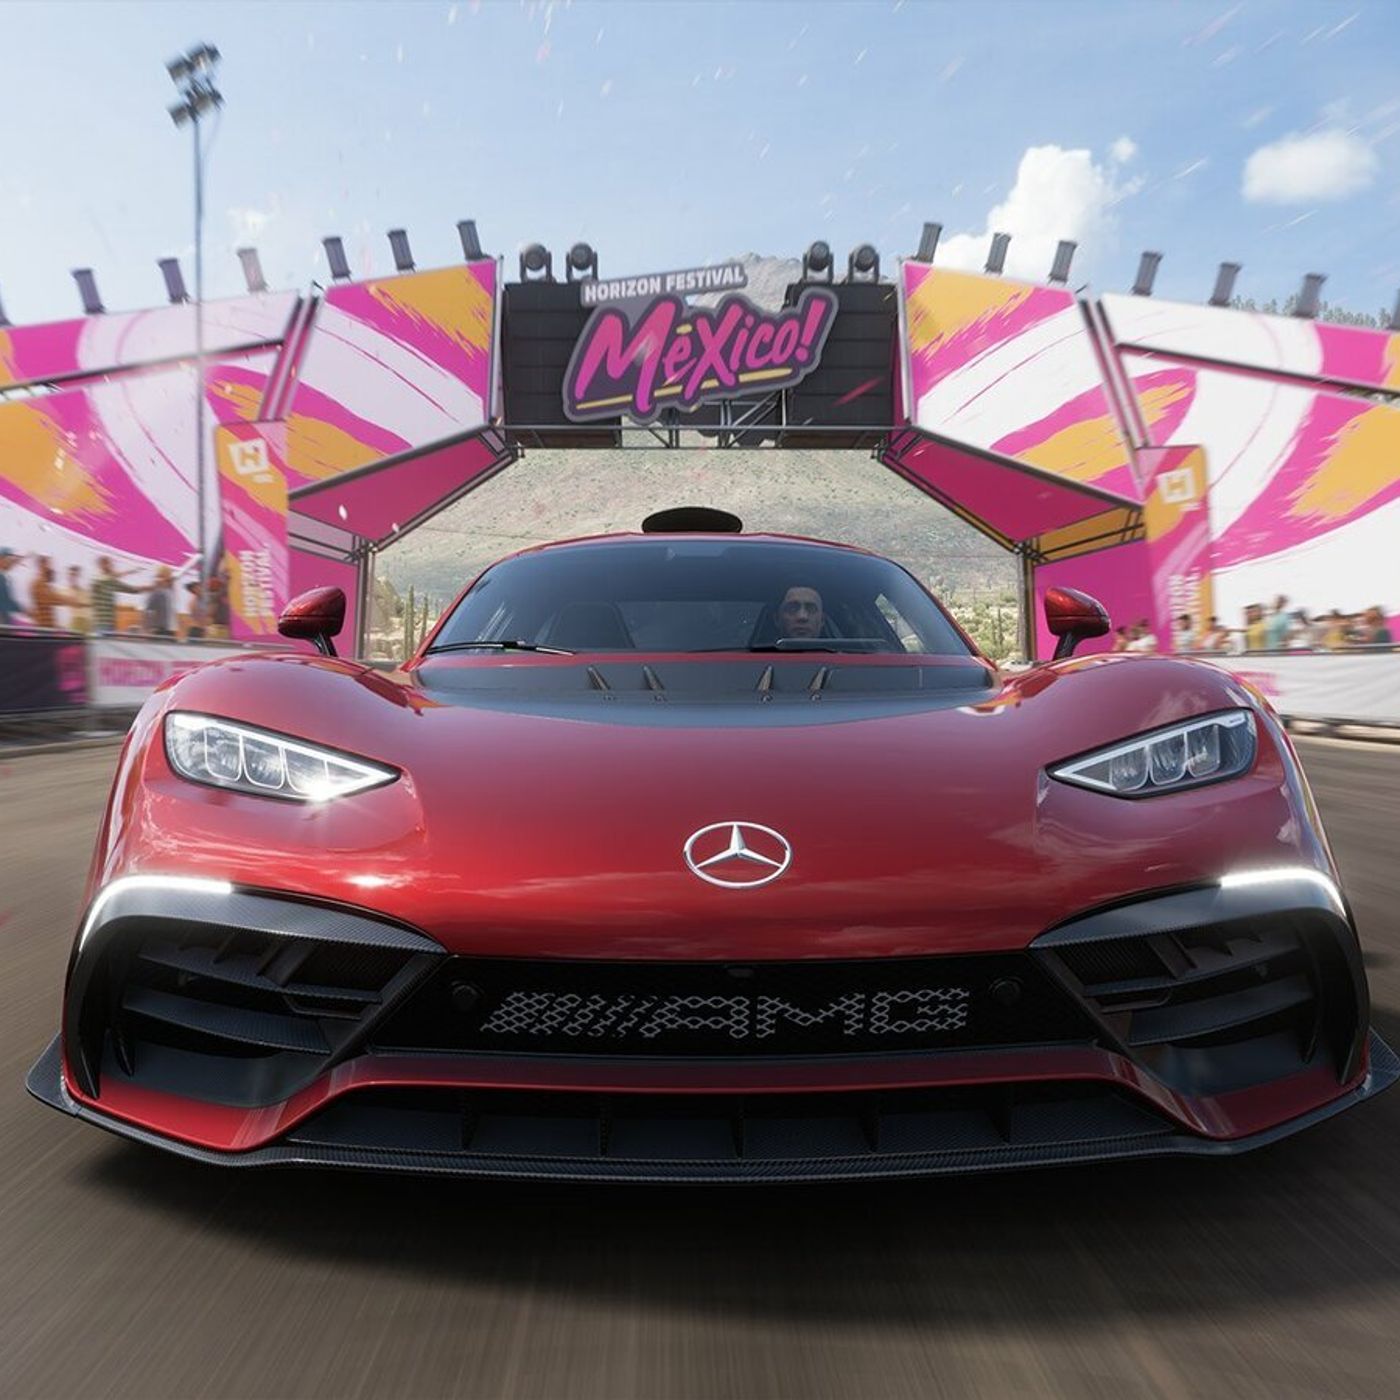 S16 Ep1175: Forza Horizon 5 Review and GeForce Now RTX 3080 hands-on Impressions